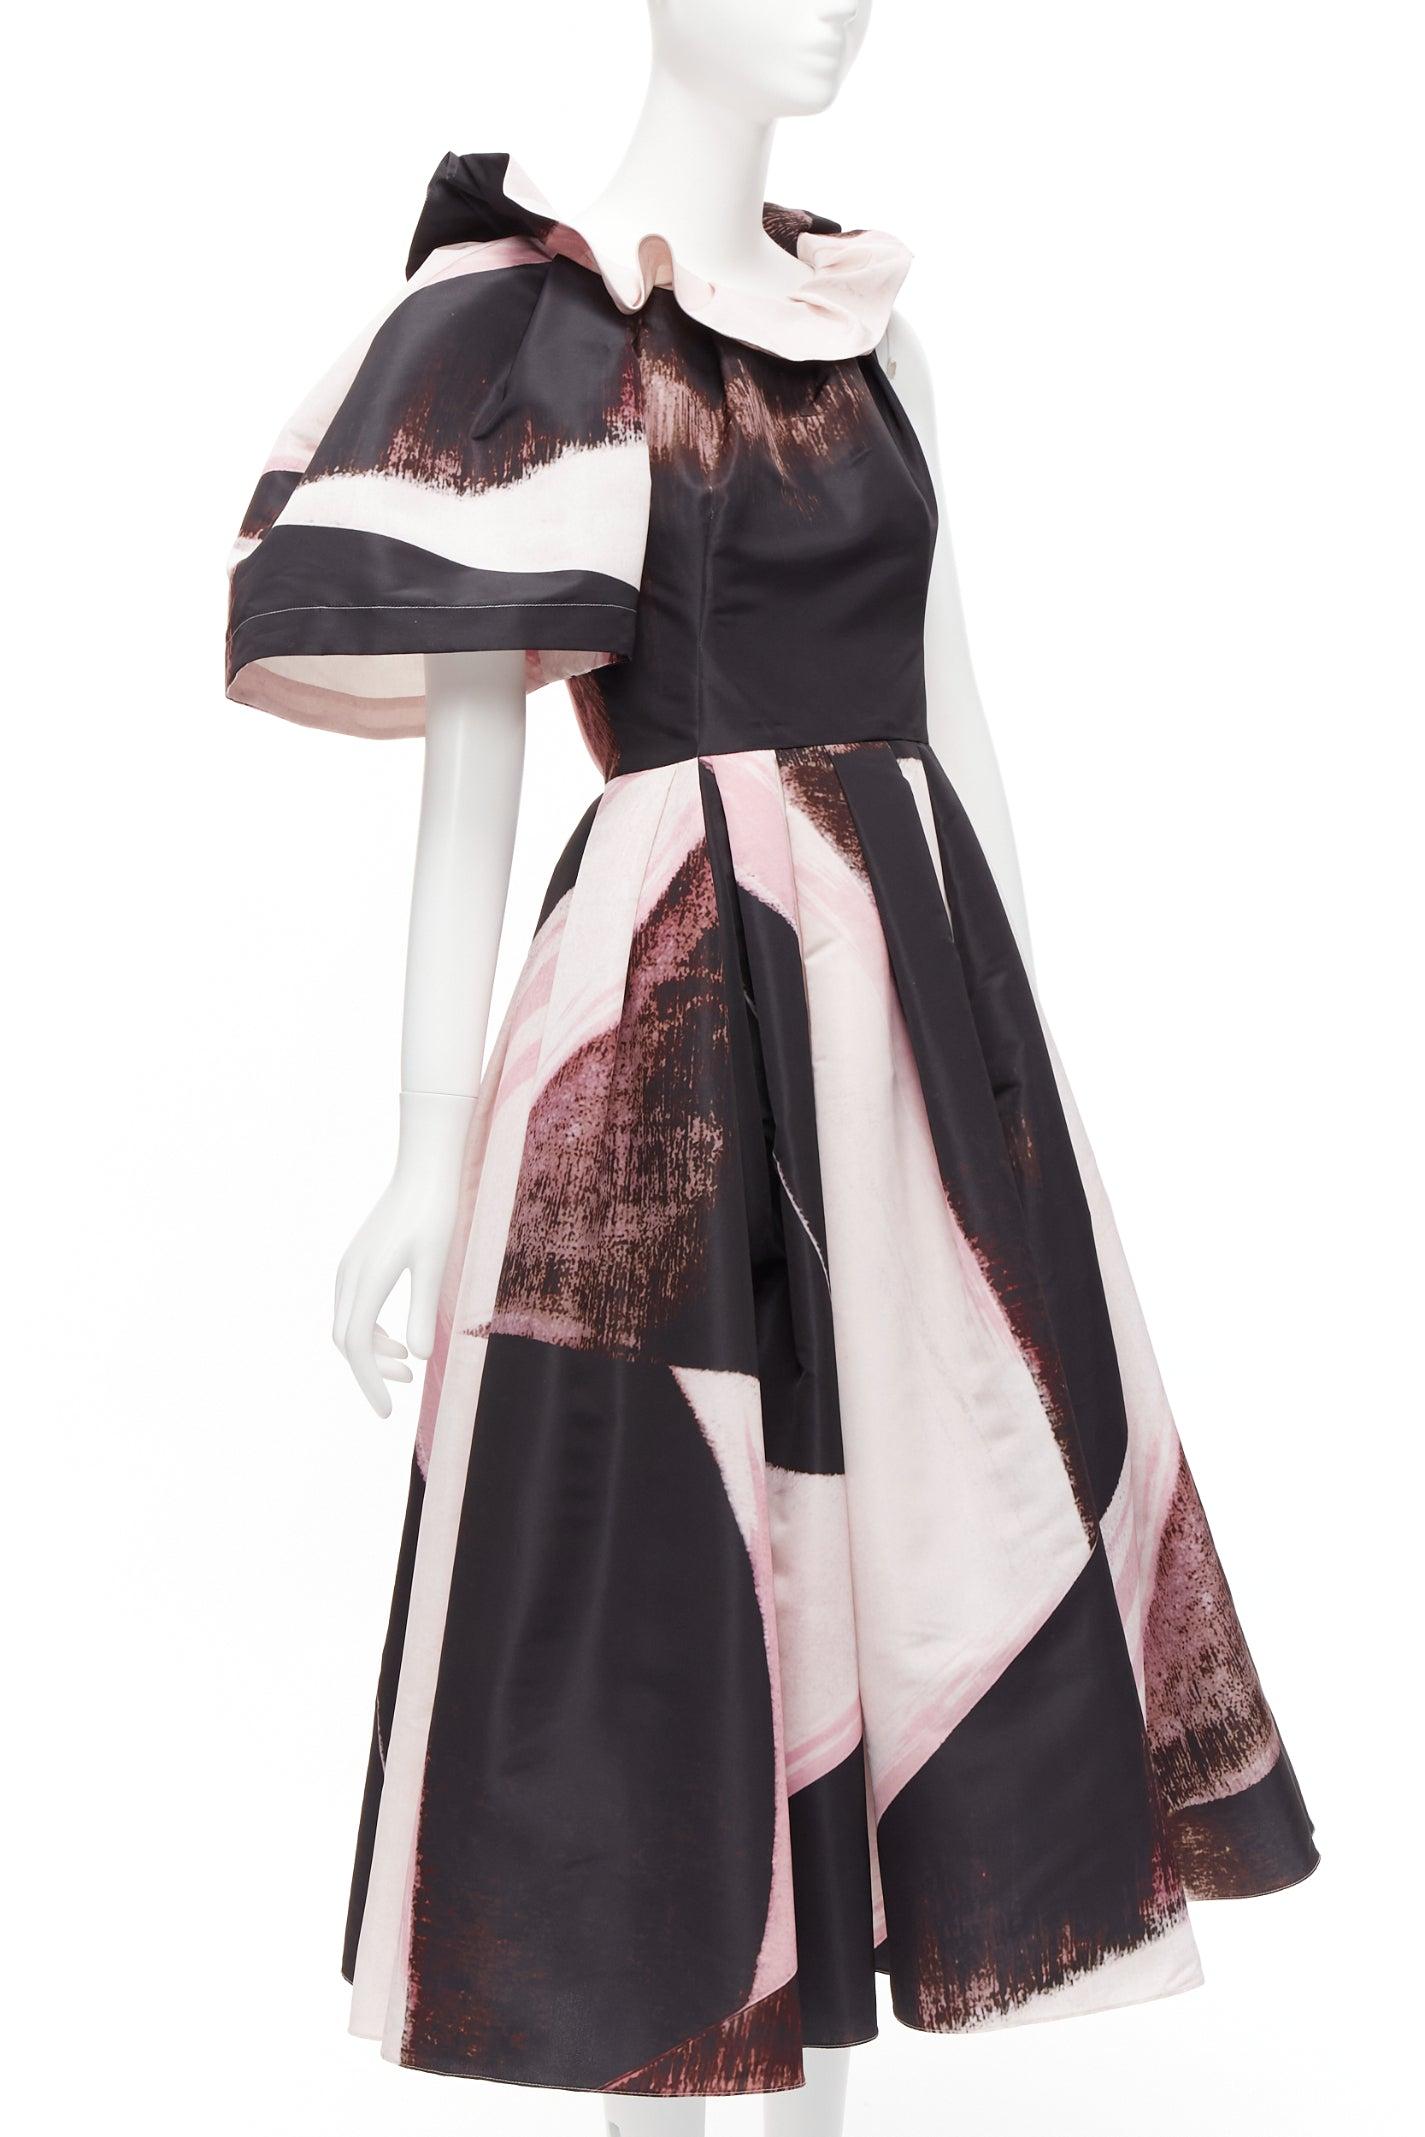 ALEXANDER MCQUEEN 2022 Charles Arnoldi Brushstroke print asymmetric gown IT38 XS
Reference: AAWC/A00687
Brand: Alexander McQueen
Designer: Sarah Burton
Collection: Charles Arnoldi 20022 - Runway
Material: Polyester
Color: Black, Pink
Pattern: